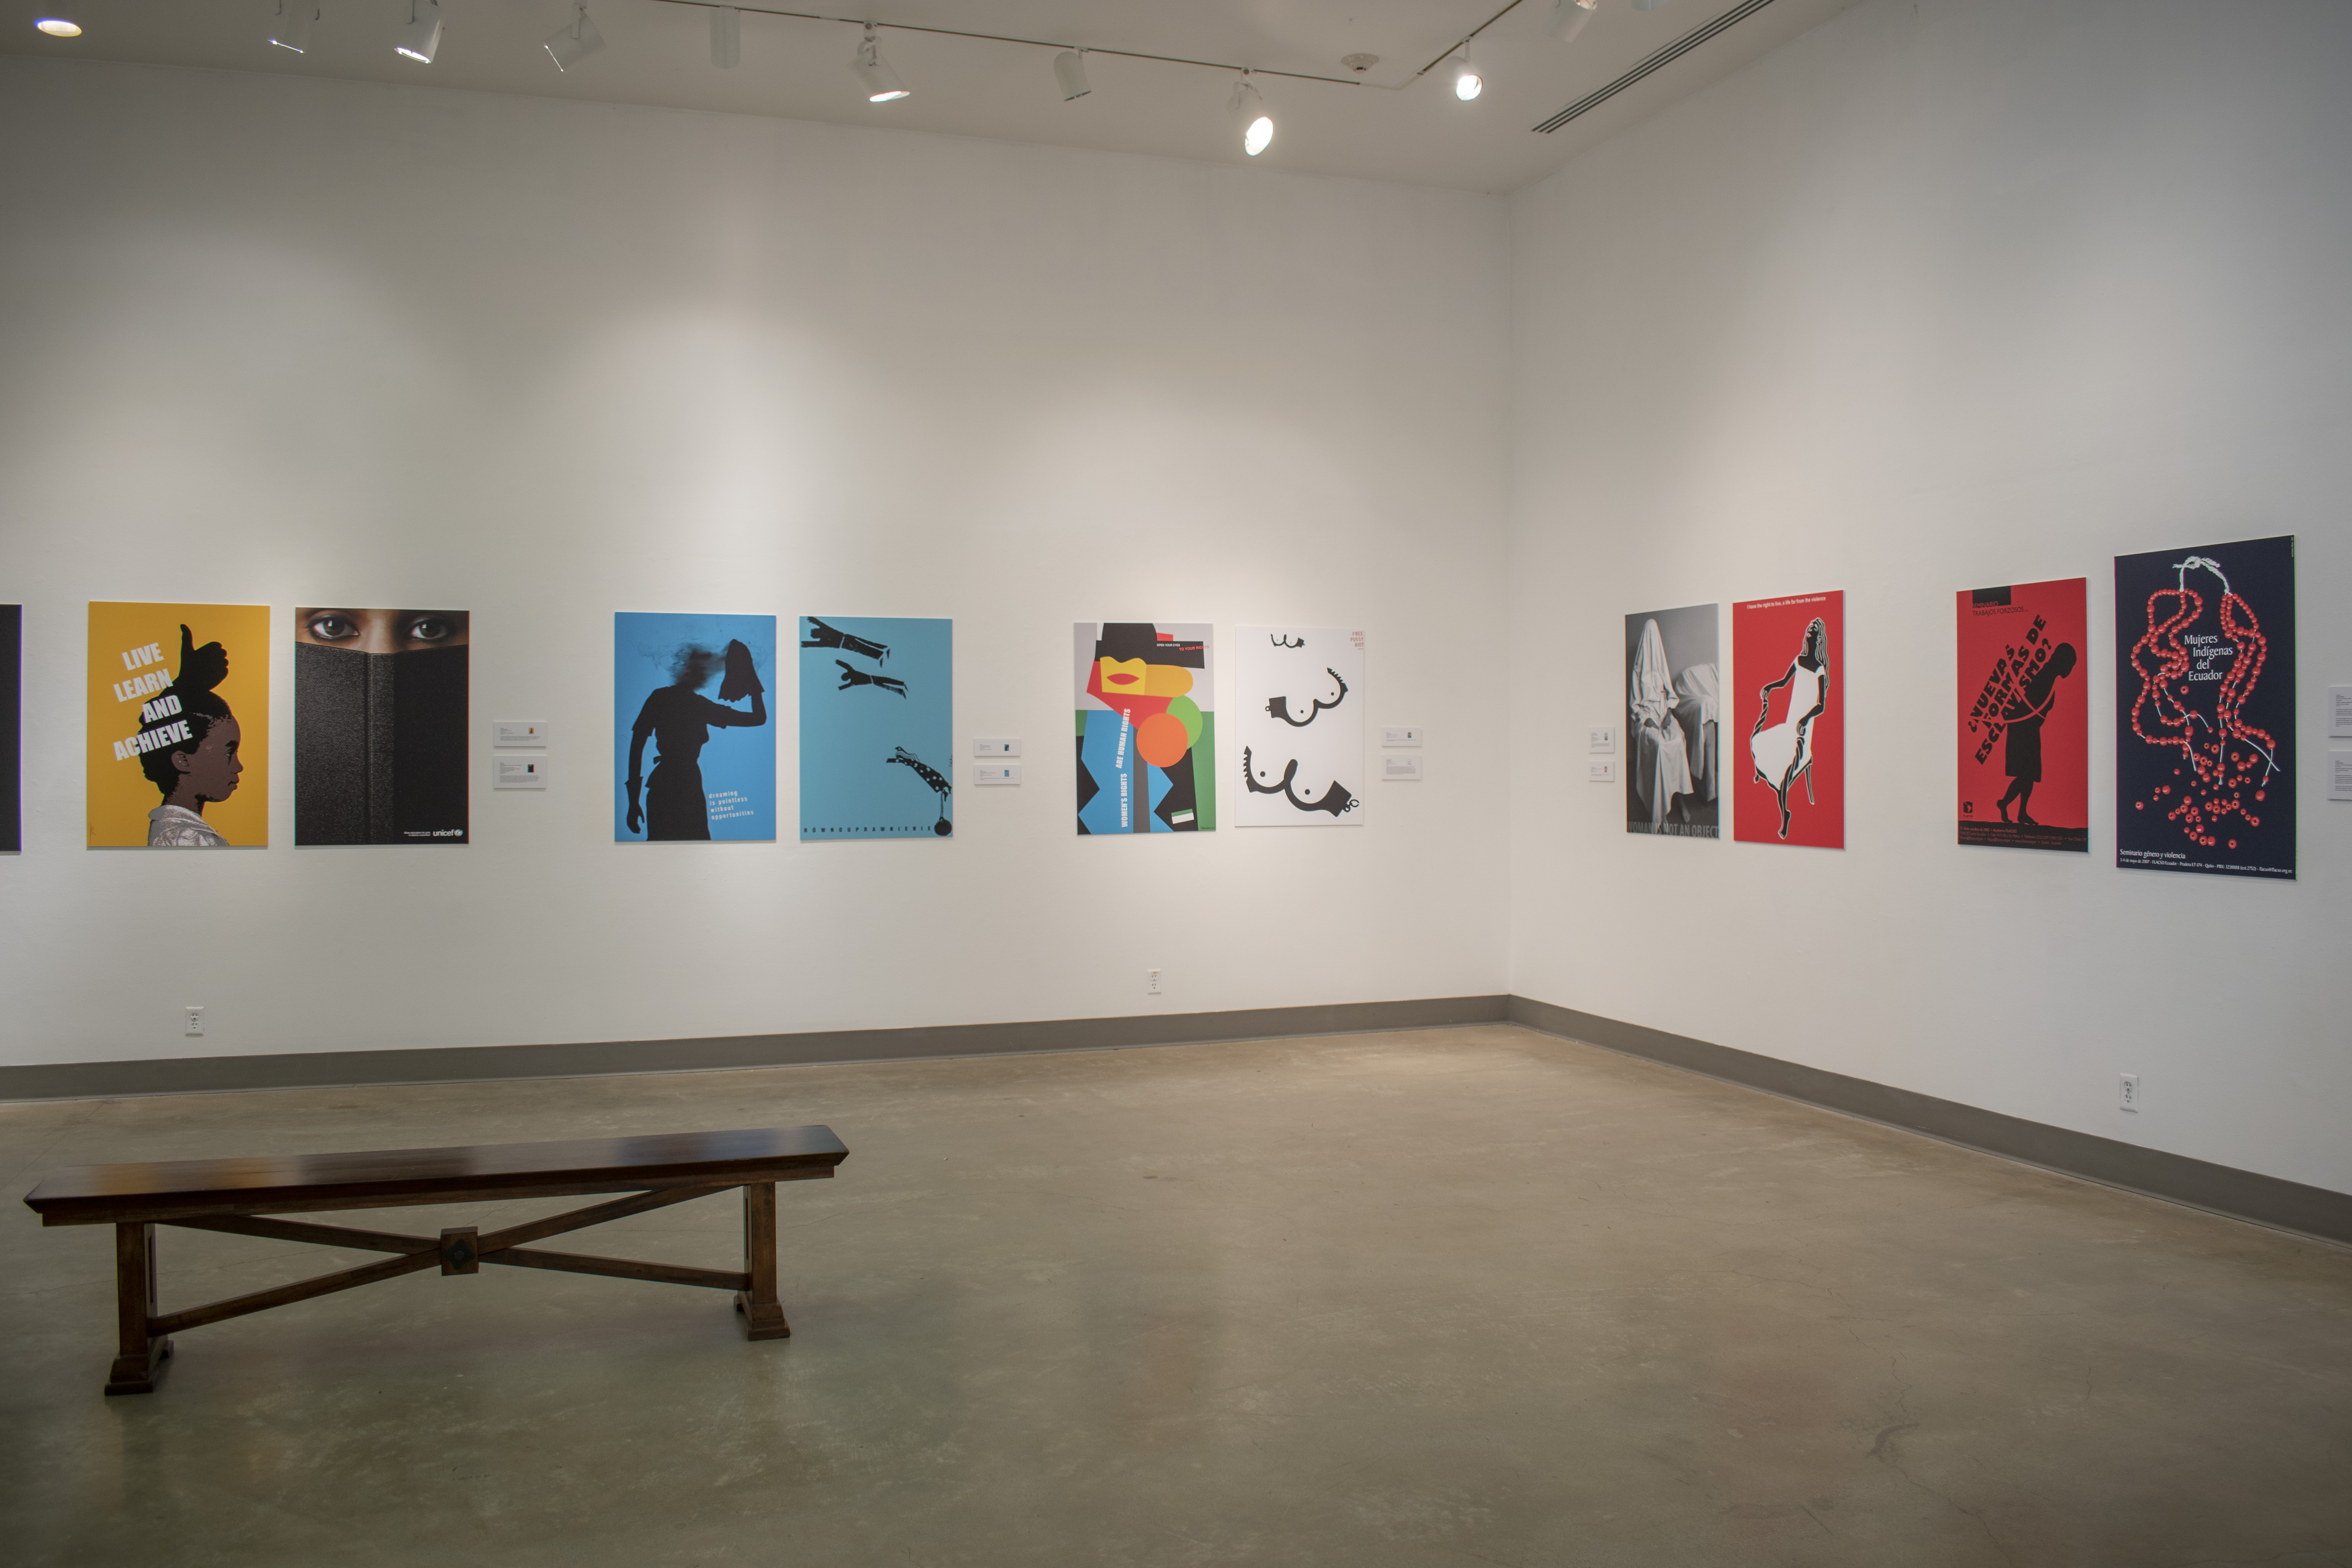 Installation View, Front East Gallery, Women's Rights are Human Rights Exhibition, Sept 15, 2021 to Dec 1, 2021